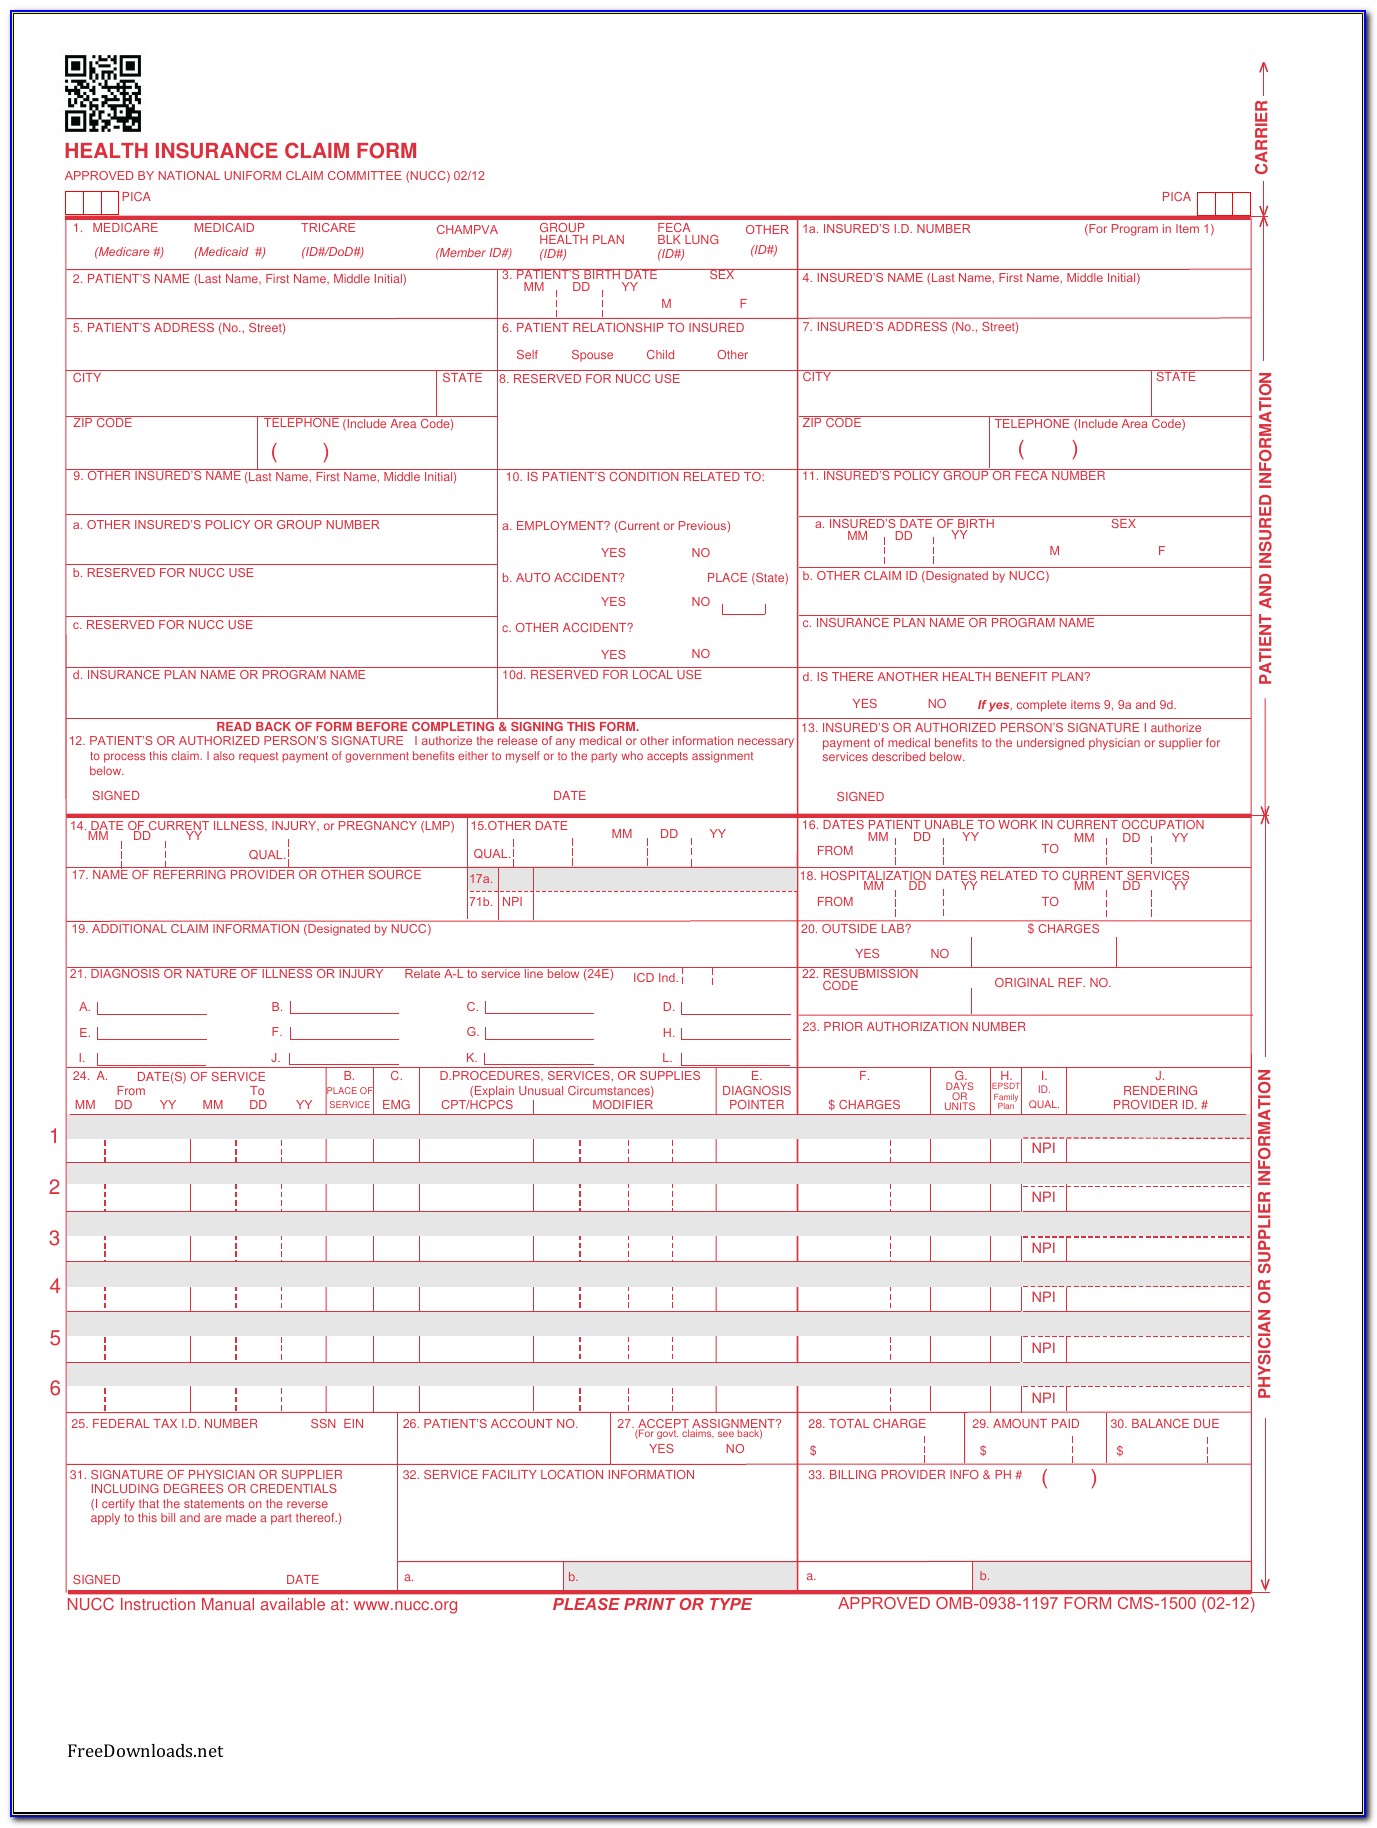 Health Insurance Claim Form 1500 Download Free